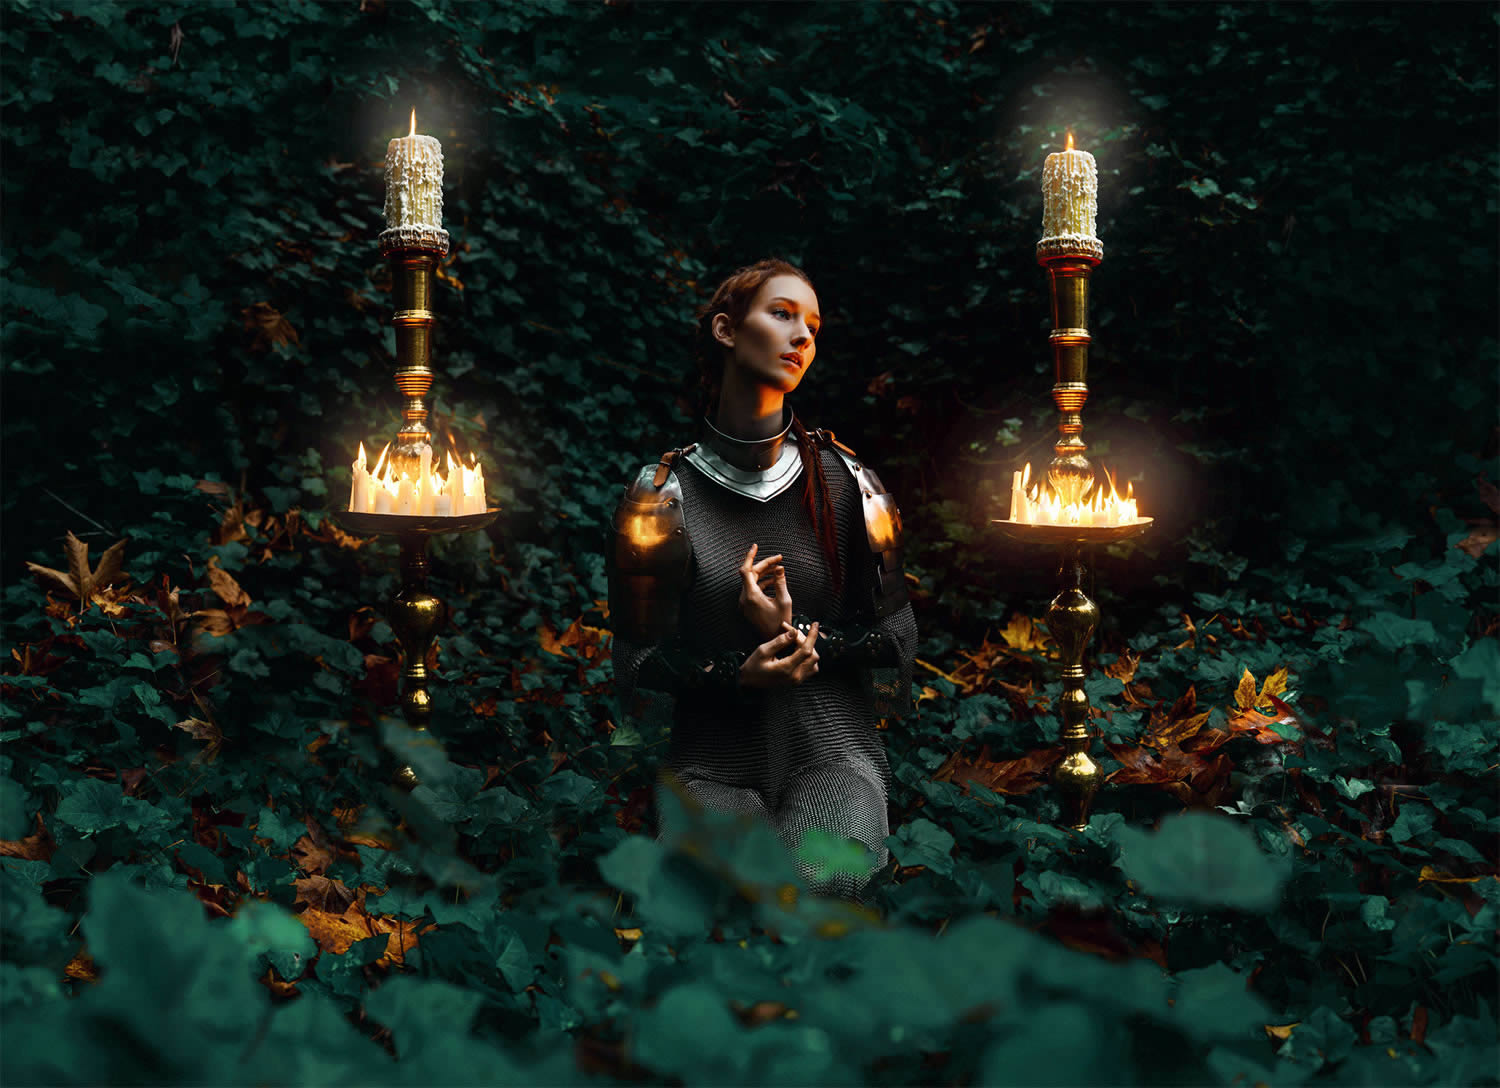 knight in forest, kneeled, candles